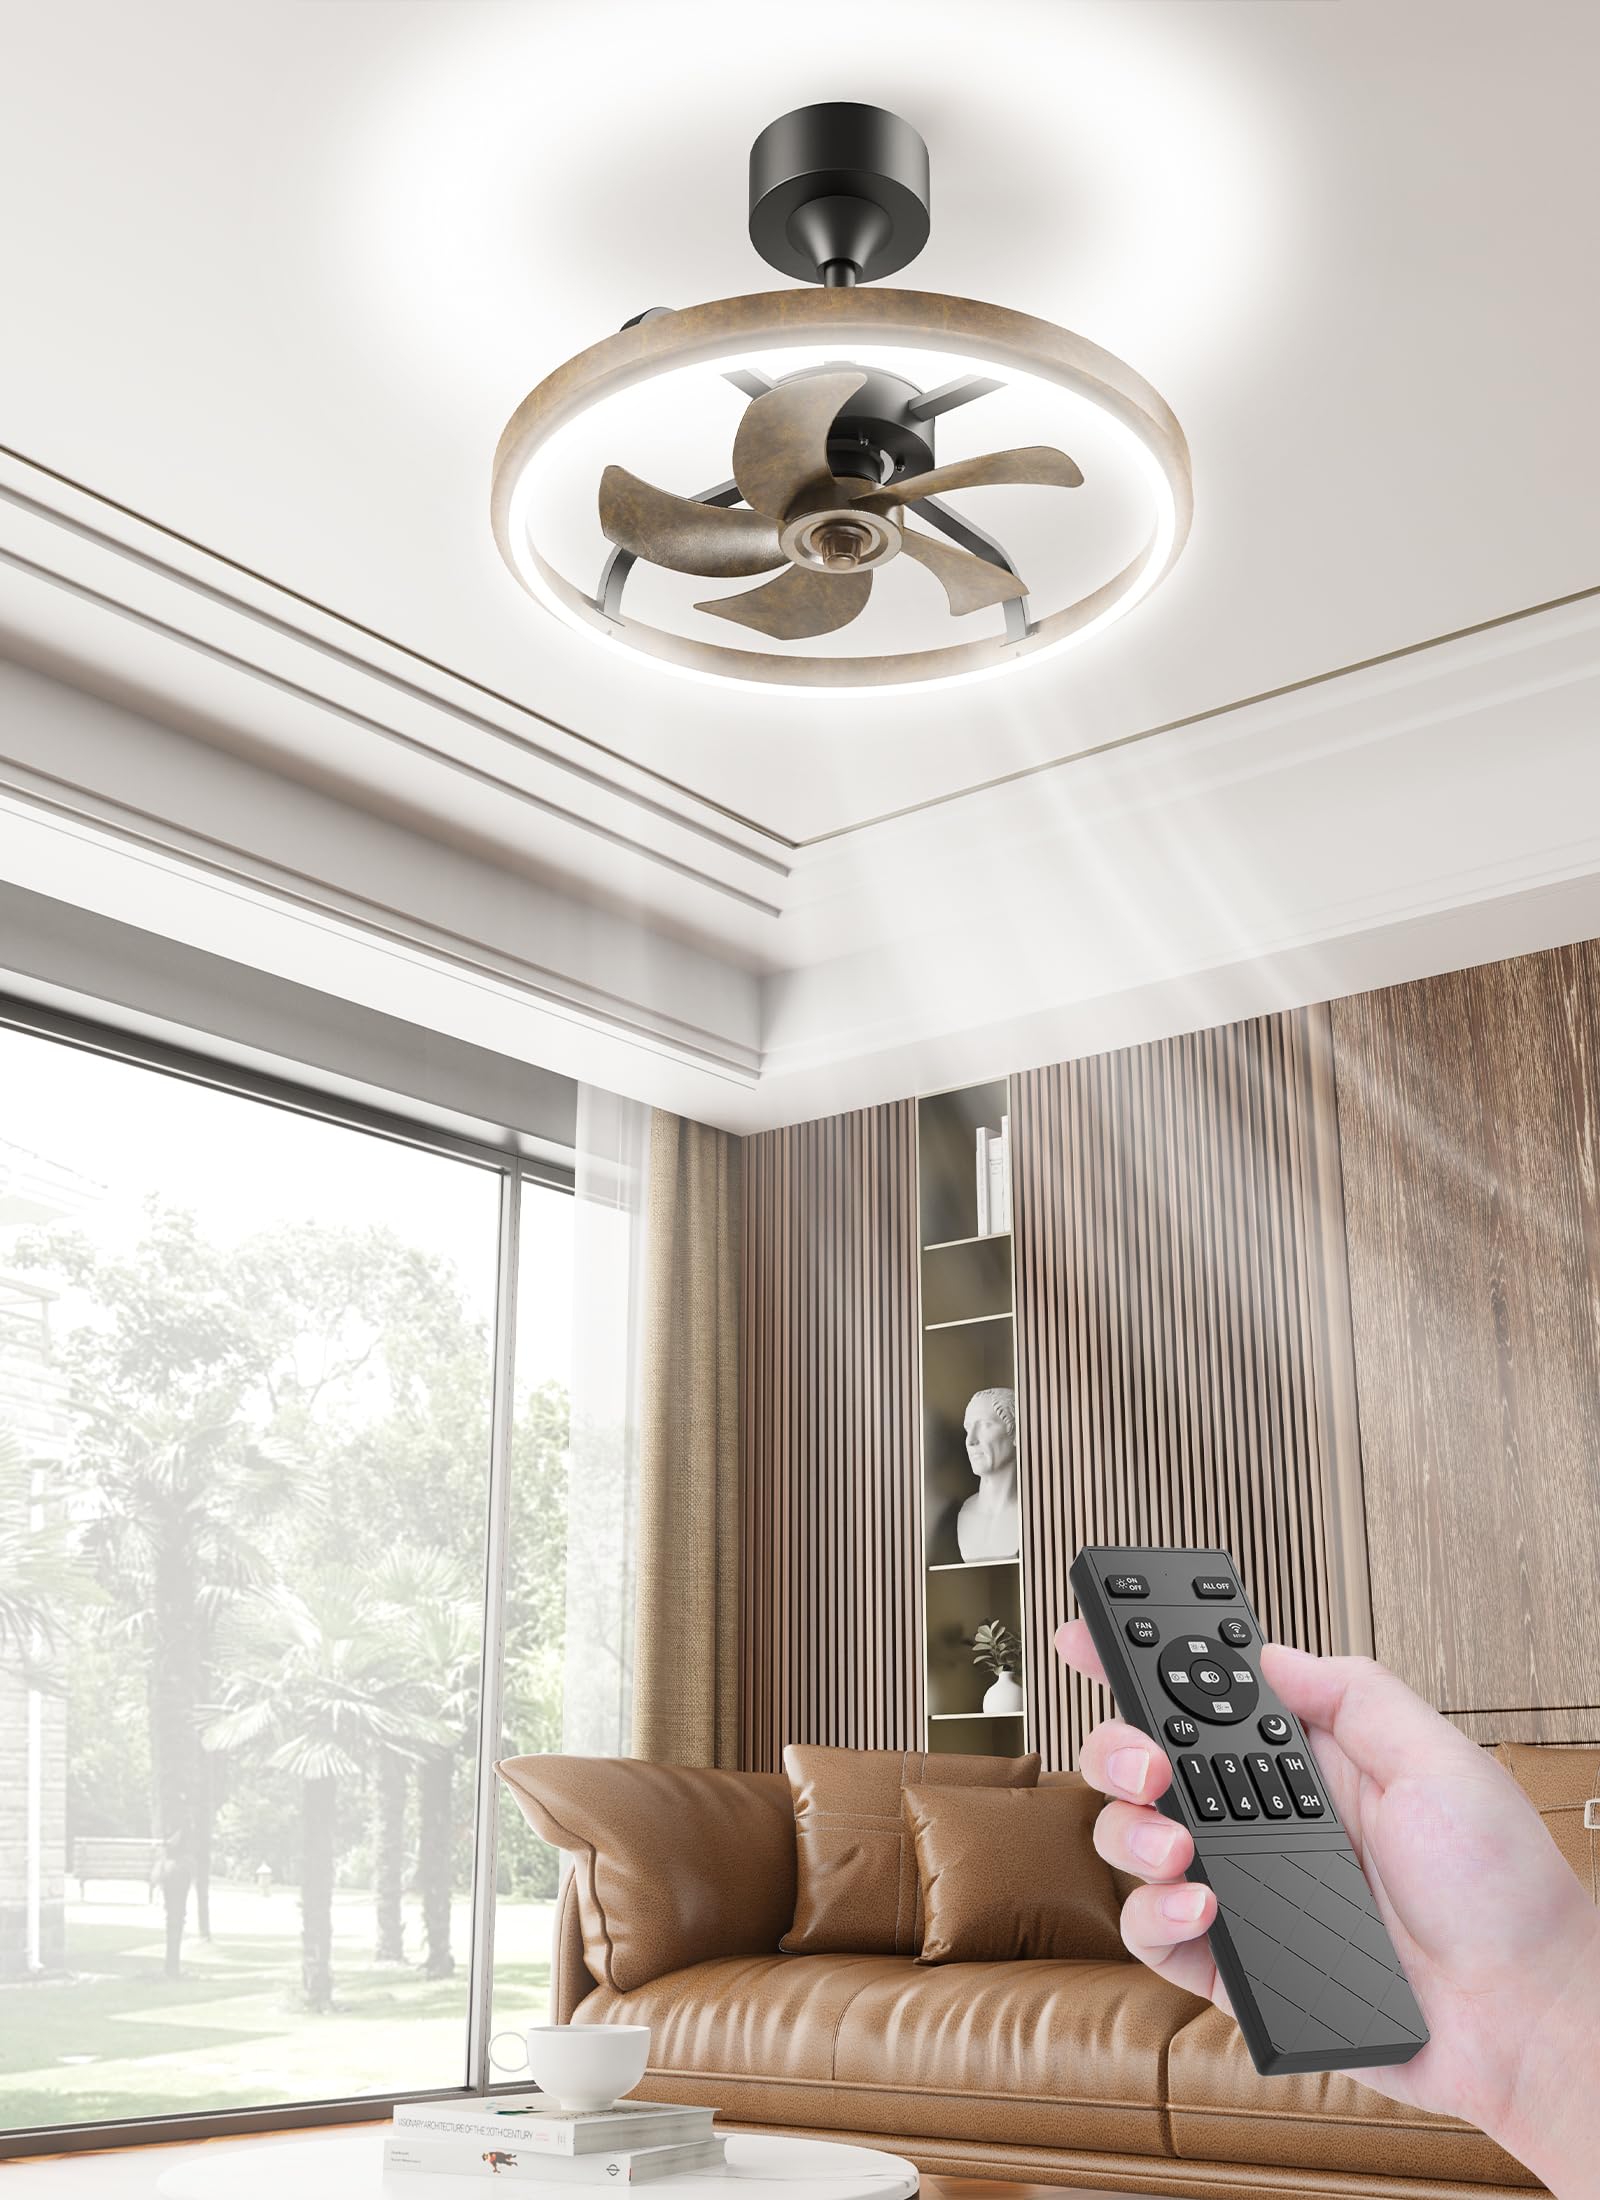 20.5” Ceiling Fan Lights with Remote, Retro Semi-Flush Mount Low Profile Ceiling Fan, 3 Light Color Changes, and 6 Speeds for Bedroom, Living Room, Study, Kitchen